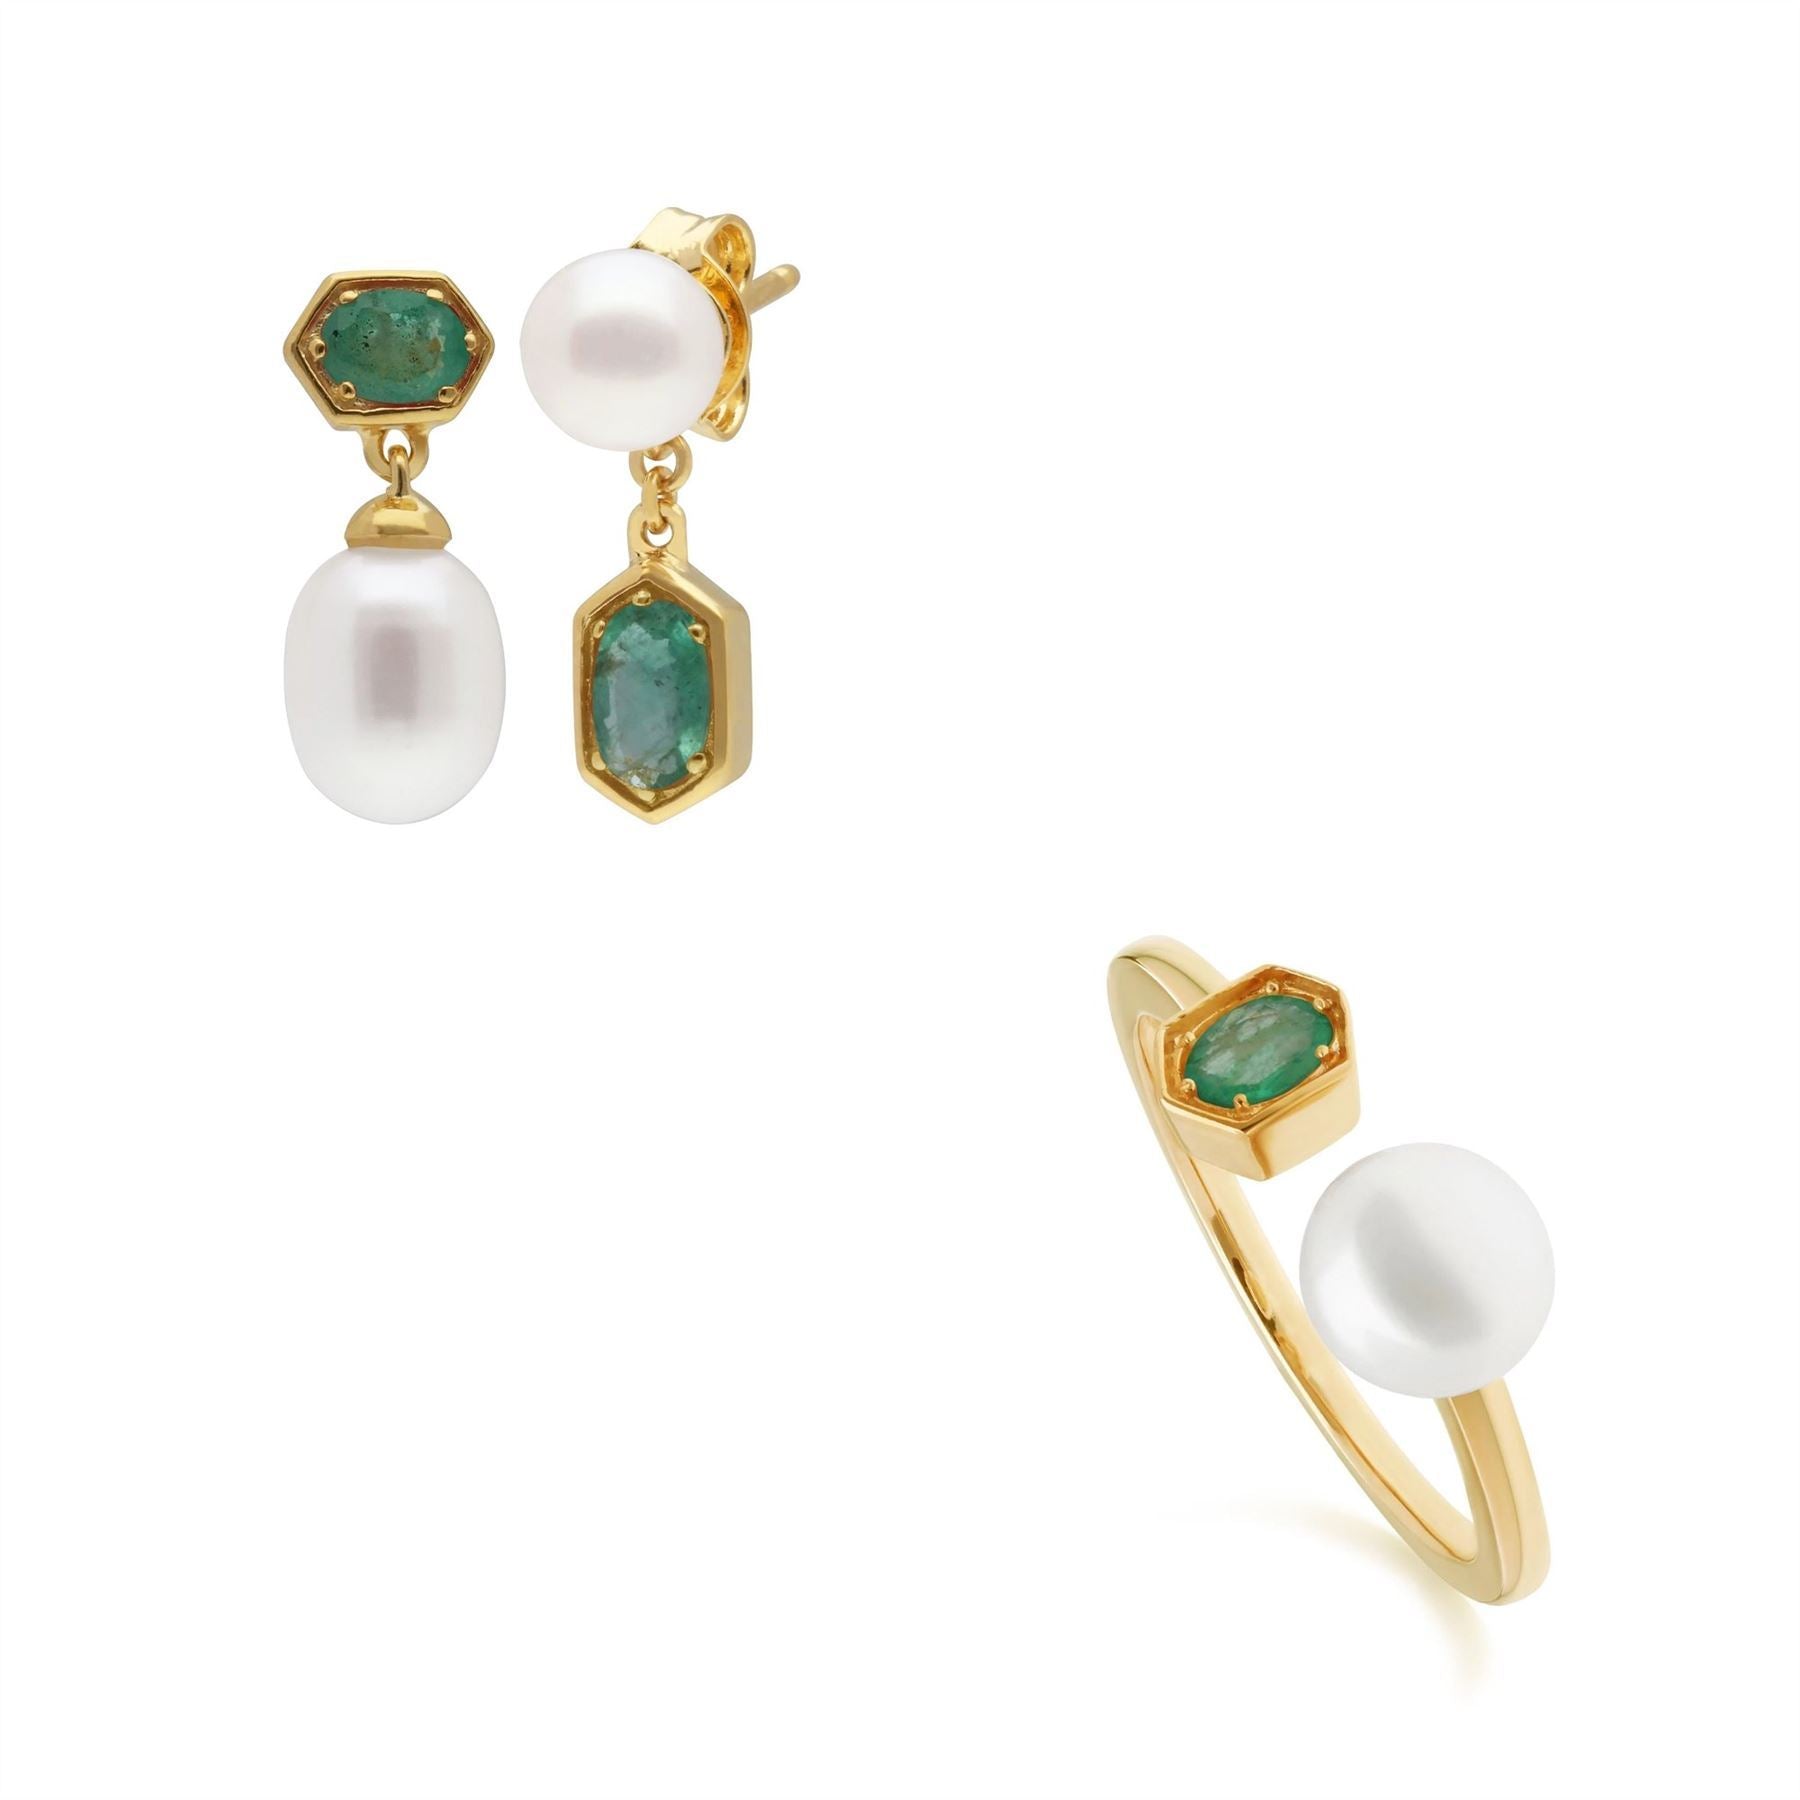 Modern Pearl & Emerald Earring & Ring Set in Gold Plated Sterling Silver